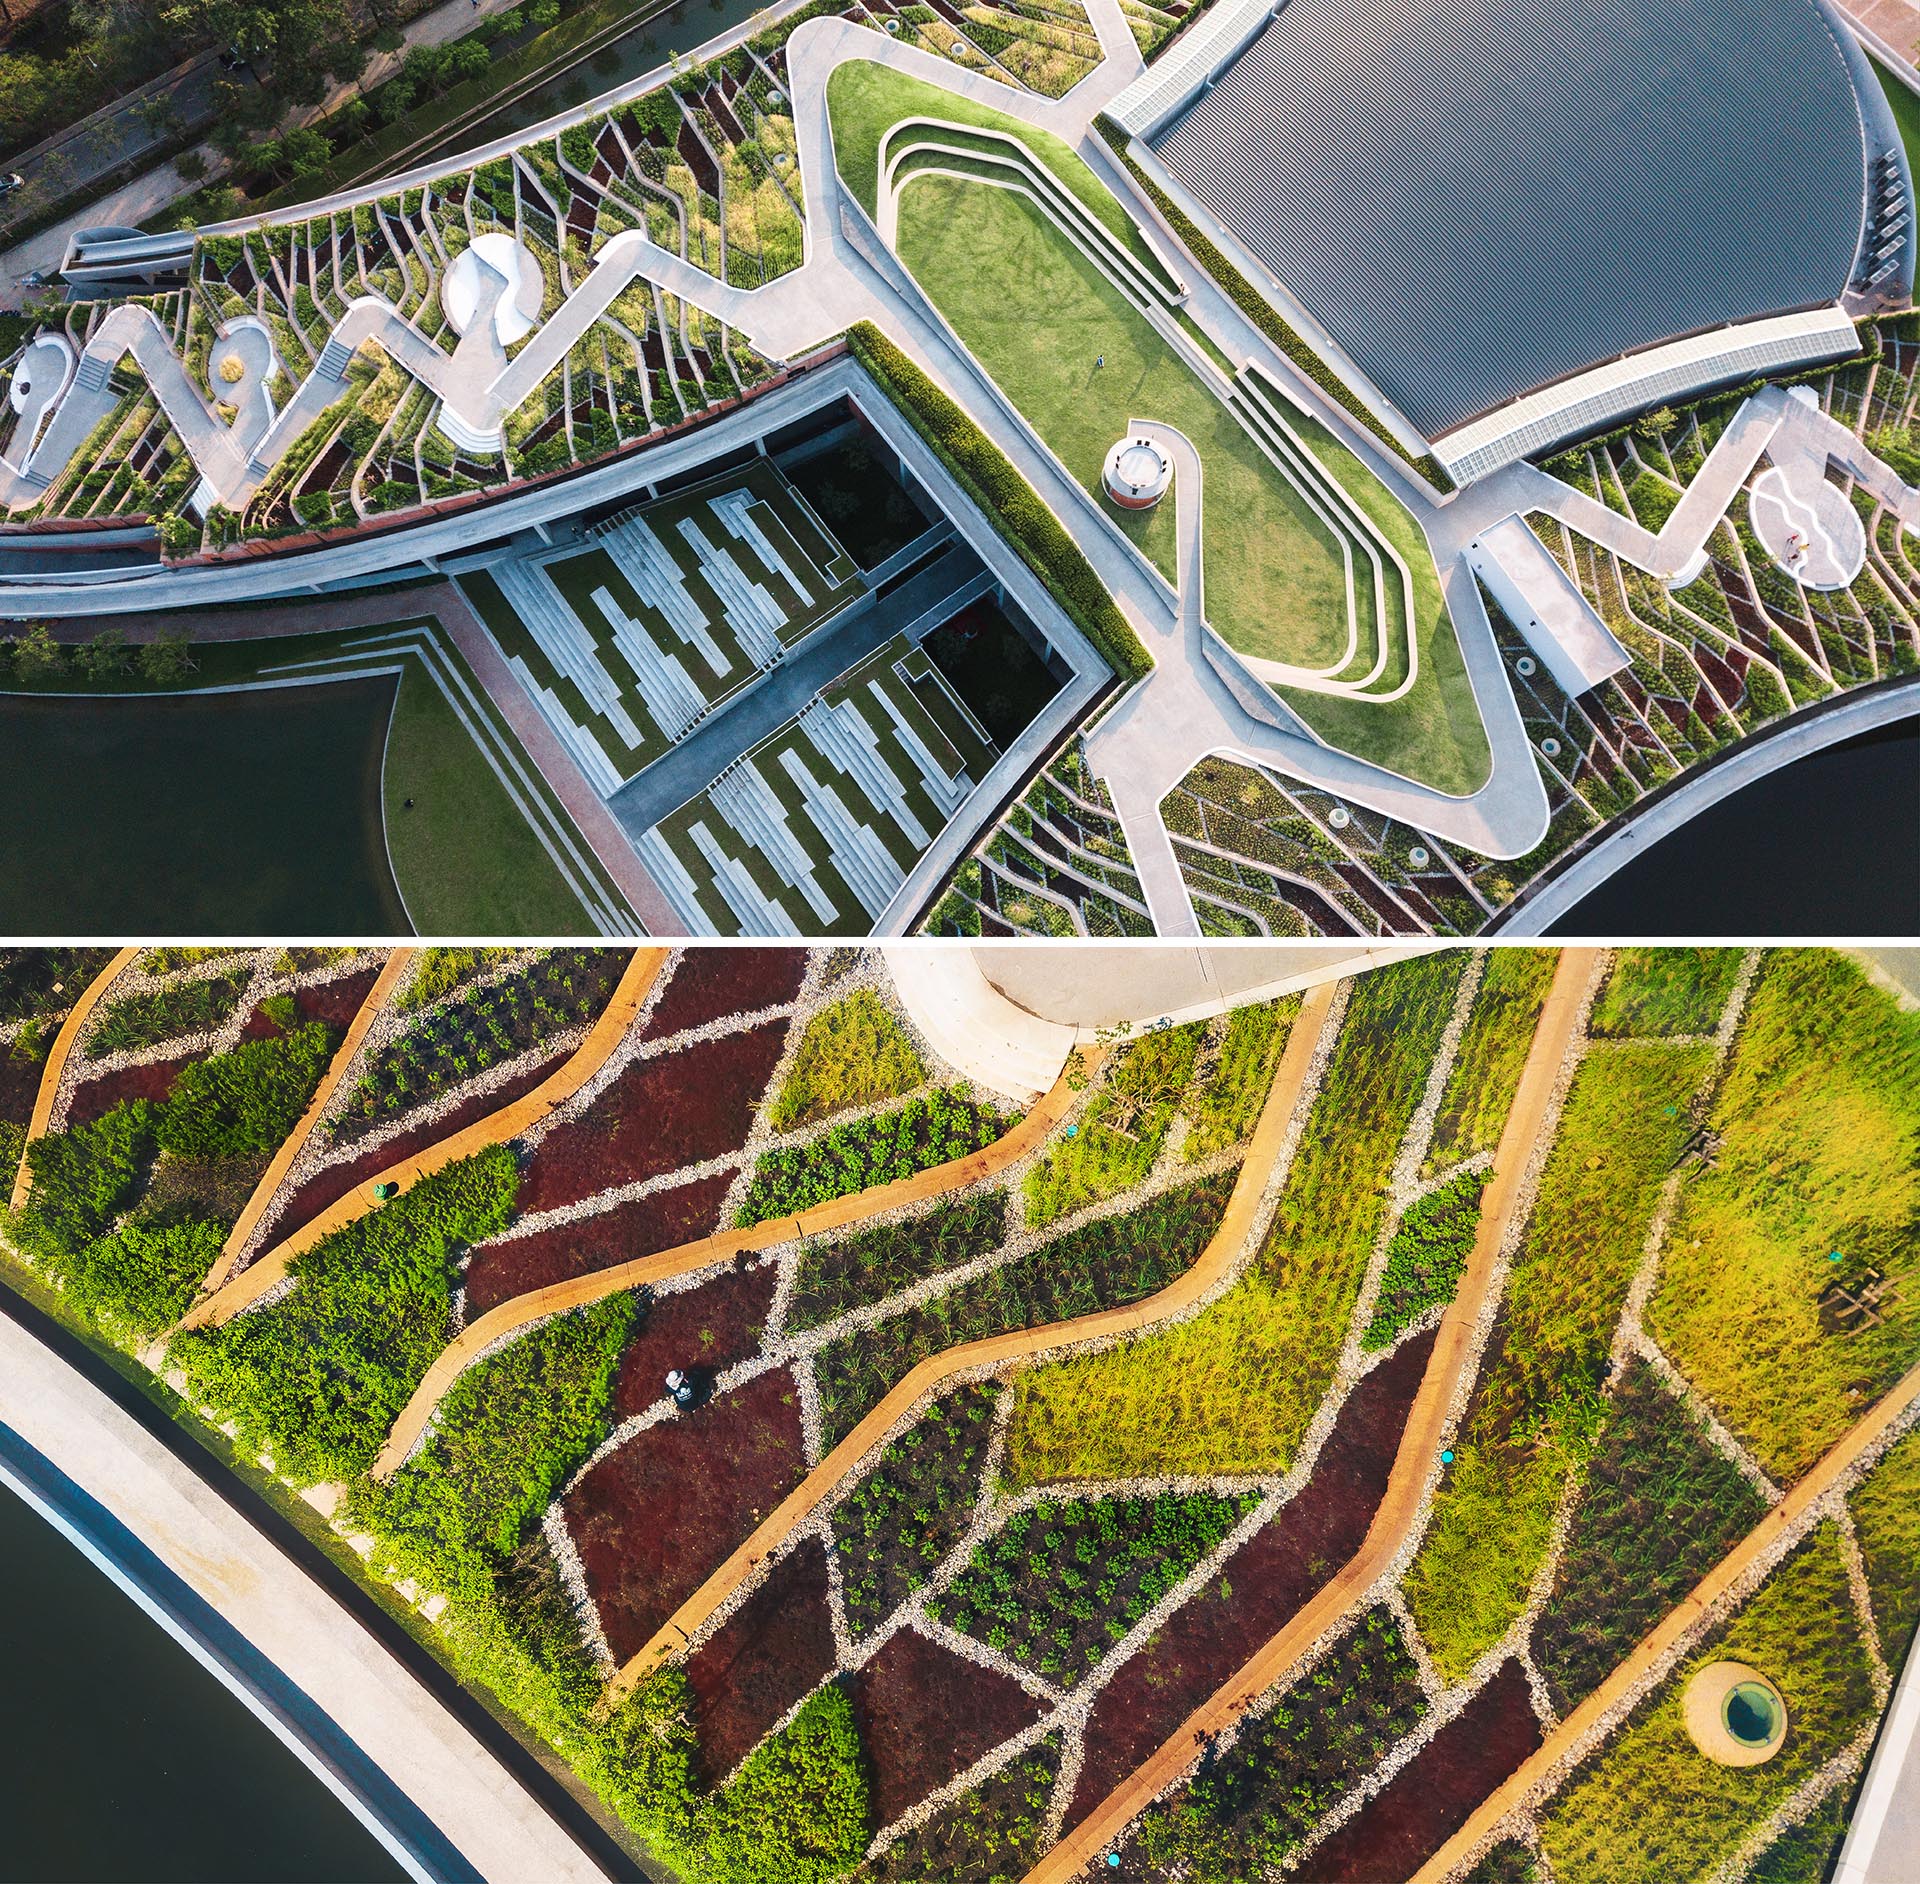 A urban farm is located on a rooftop in Thailand.